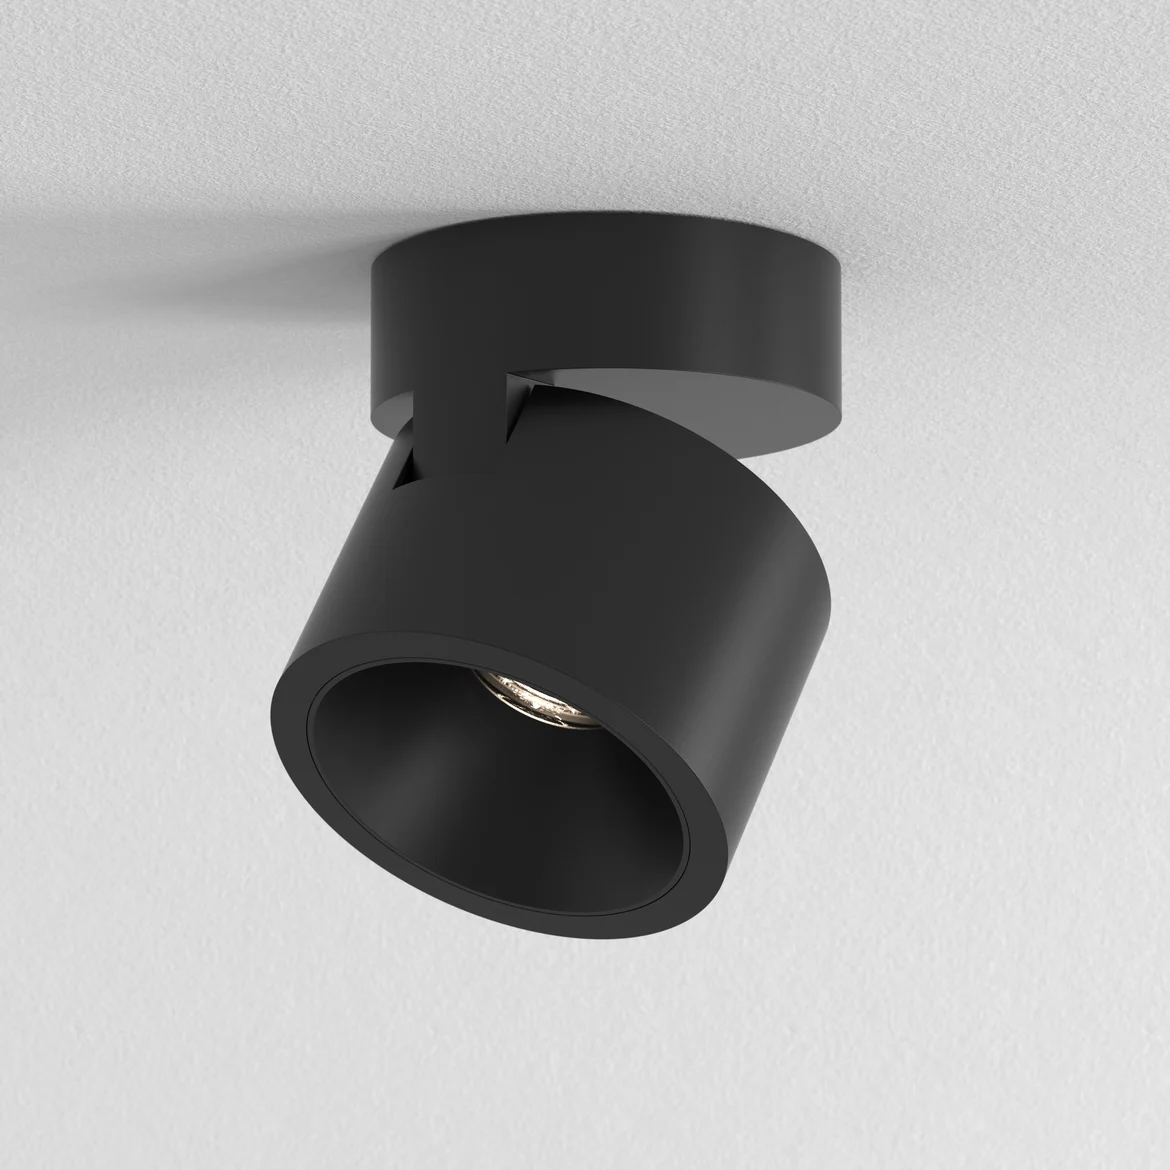 The Lynx ceiling light features a clean, minimal design with a round adjustable spotlight and round base fitted directly on a surface in a matt black finish.